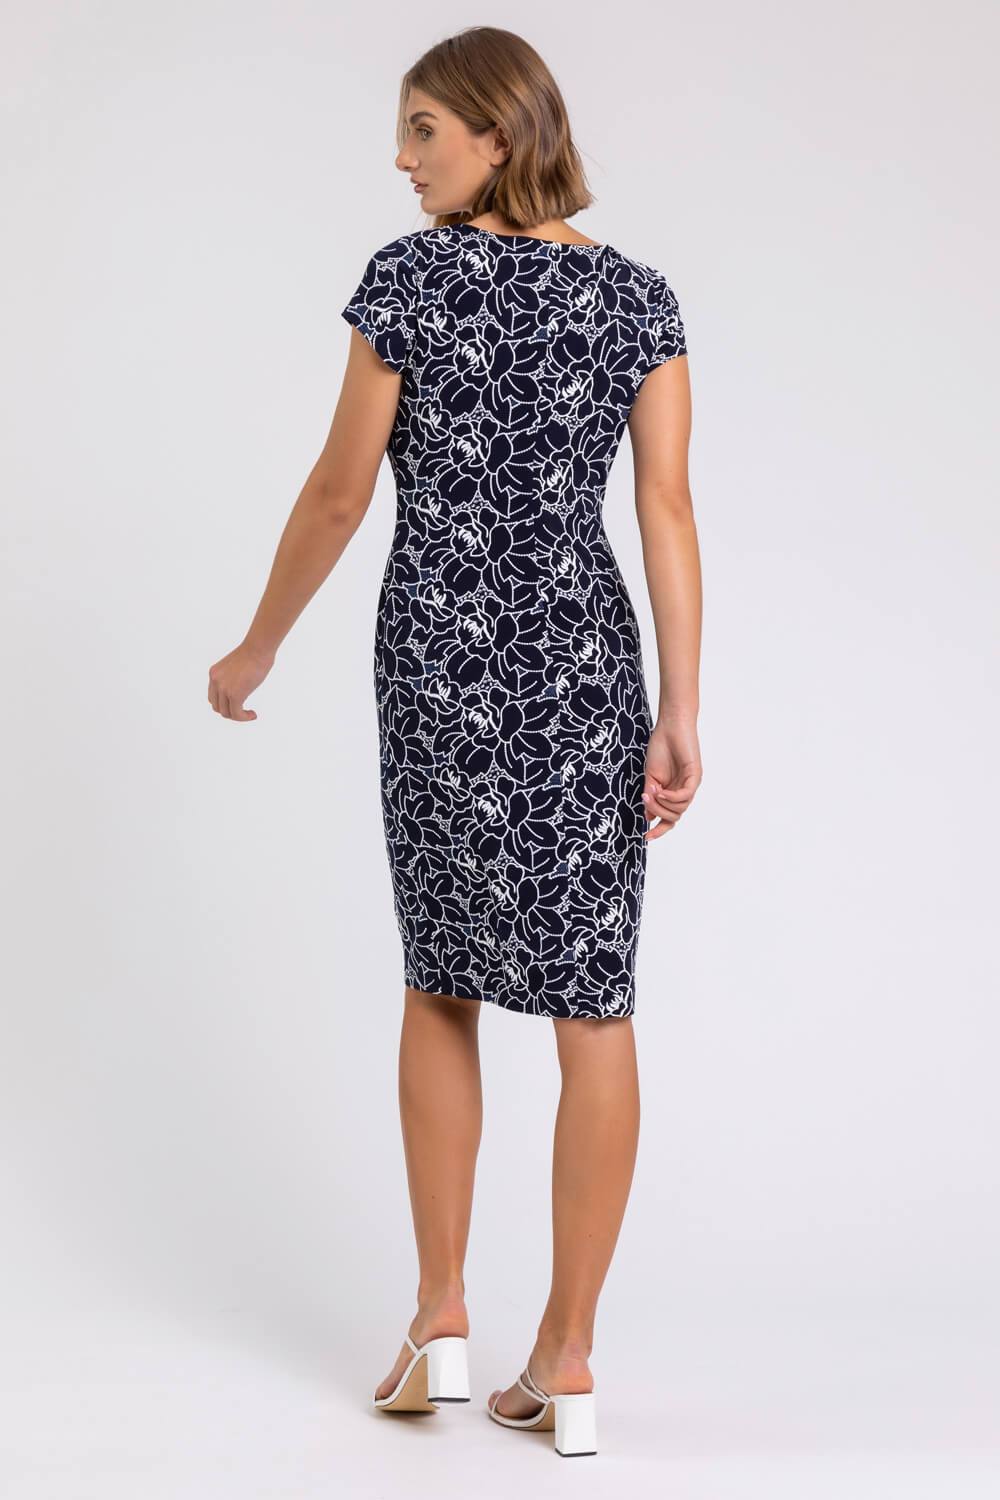 Navy White Floral Print Stretch Ruched Dress, Image 3 of 4